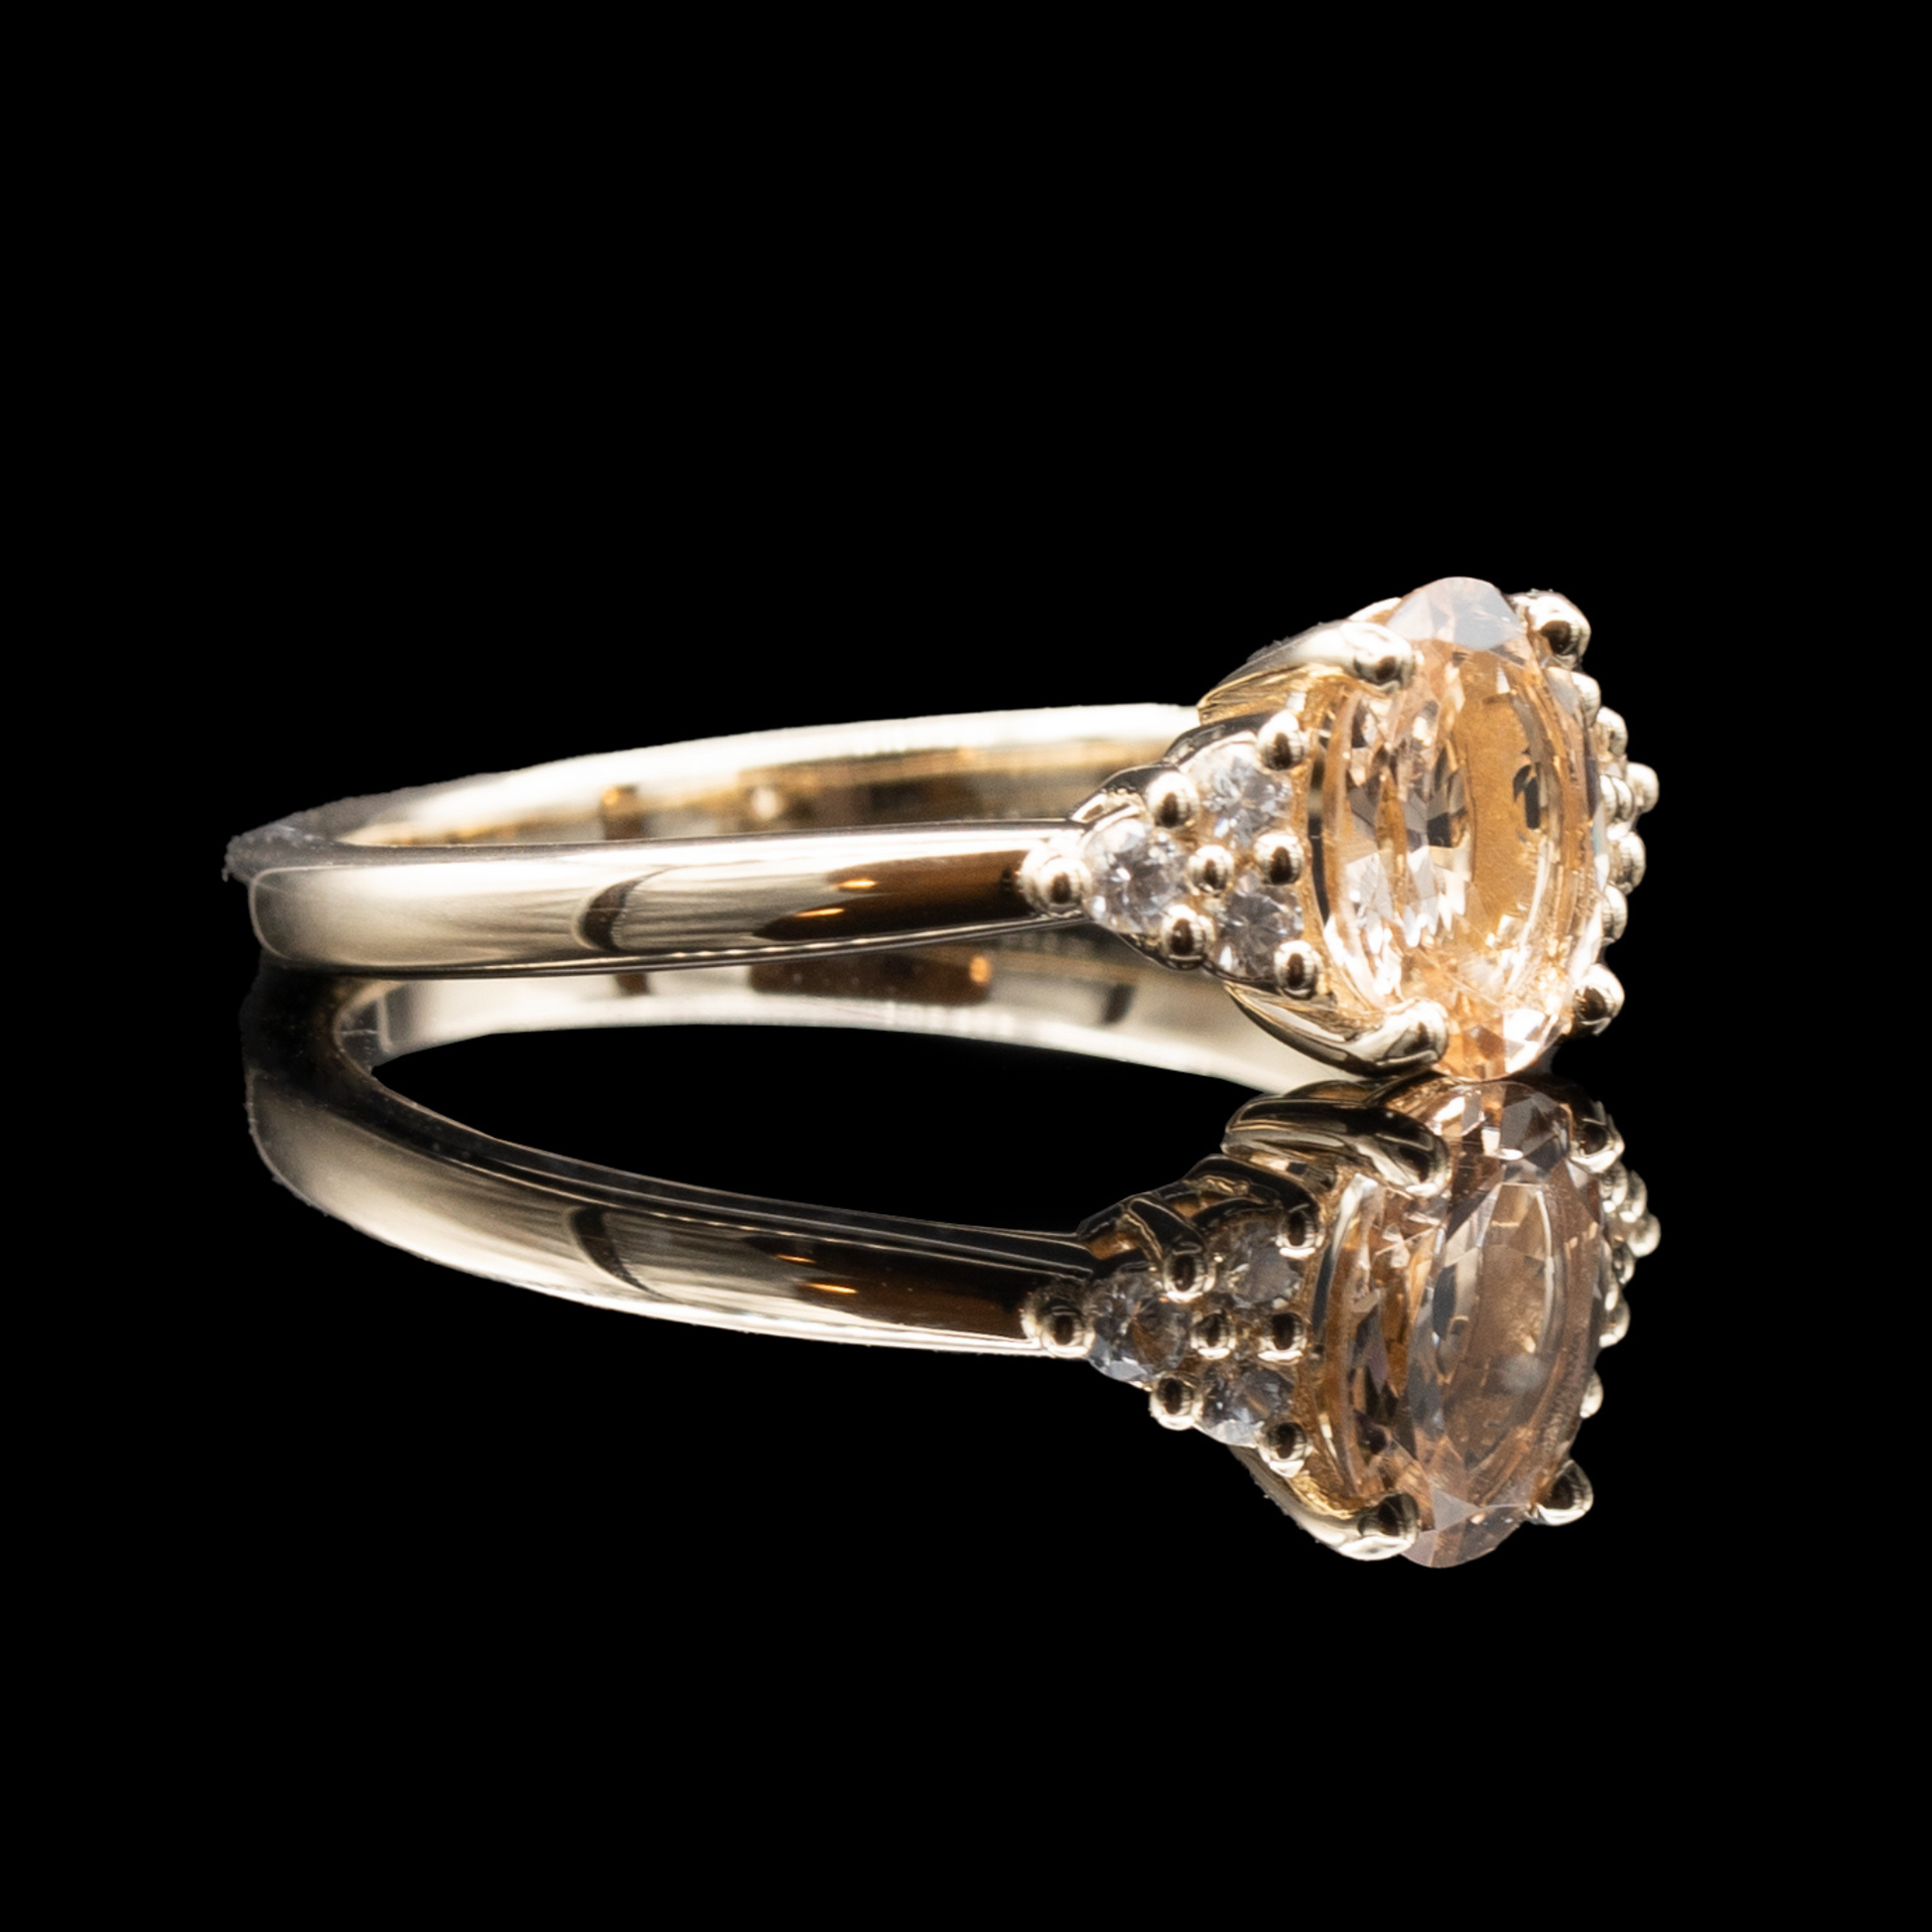 cremation ring with morganite and white sapphire